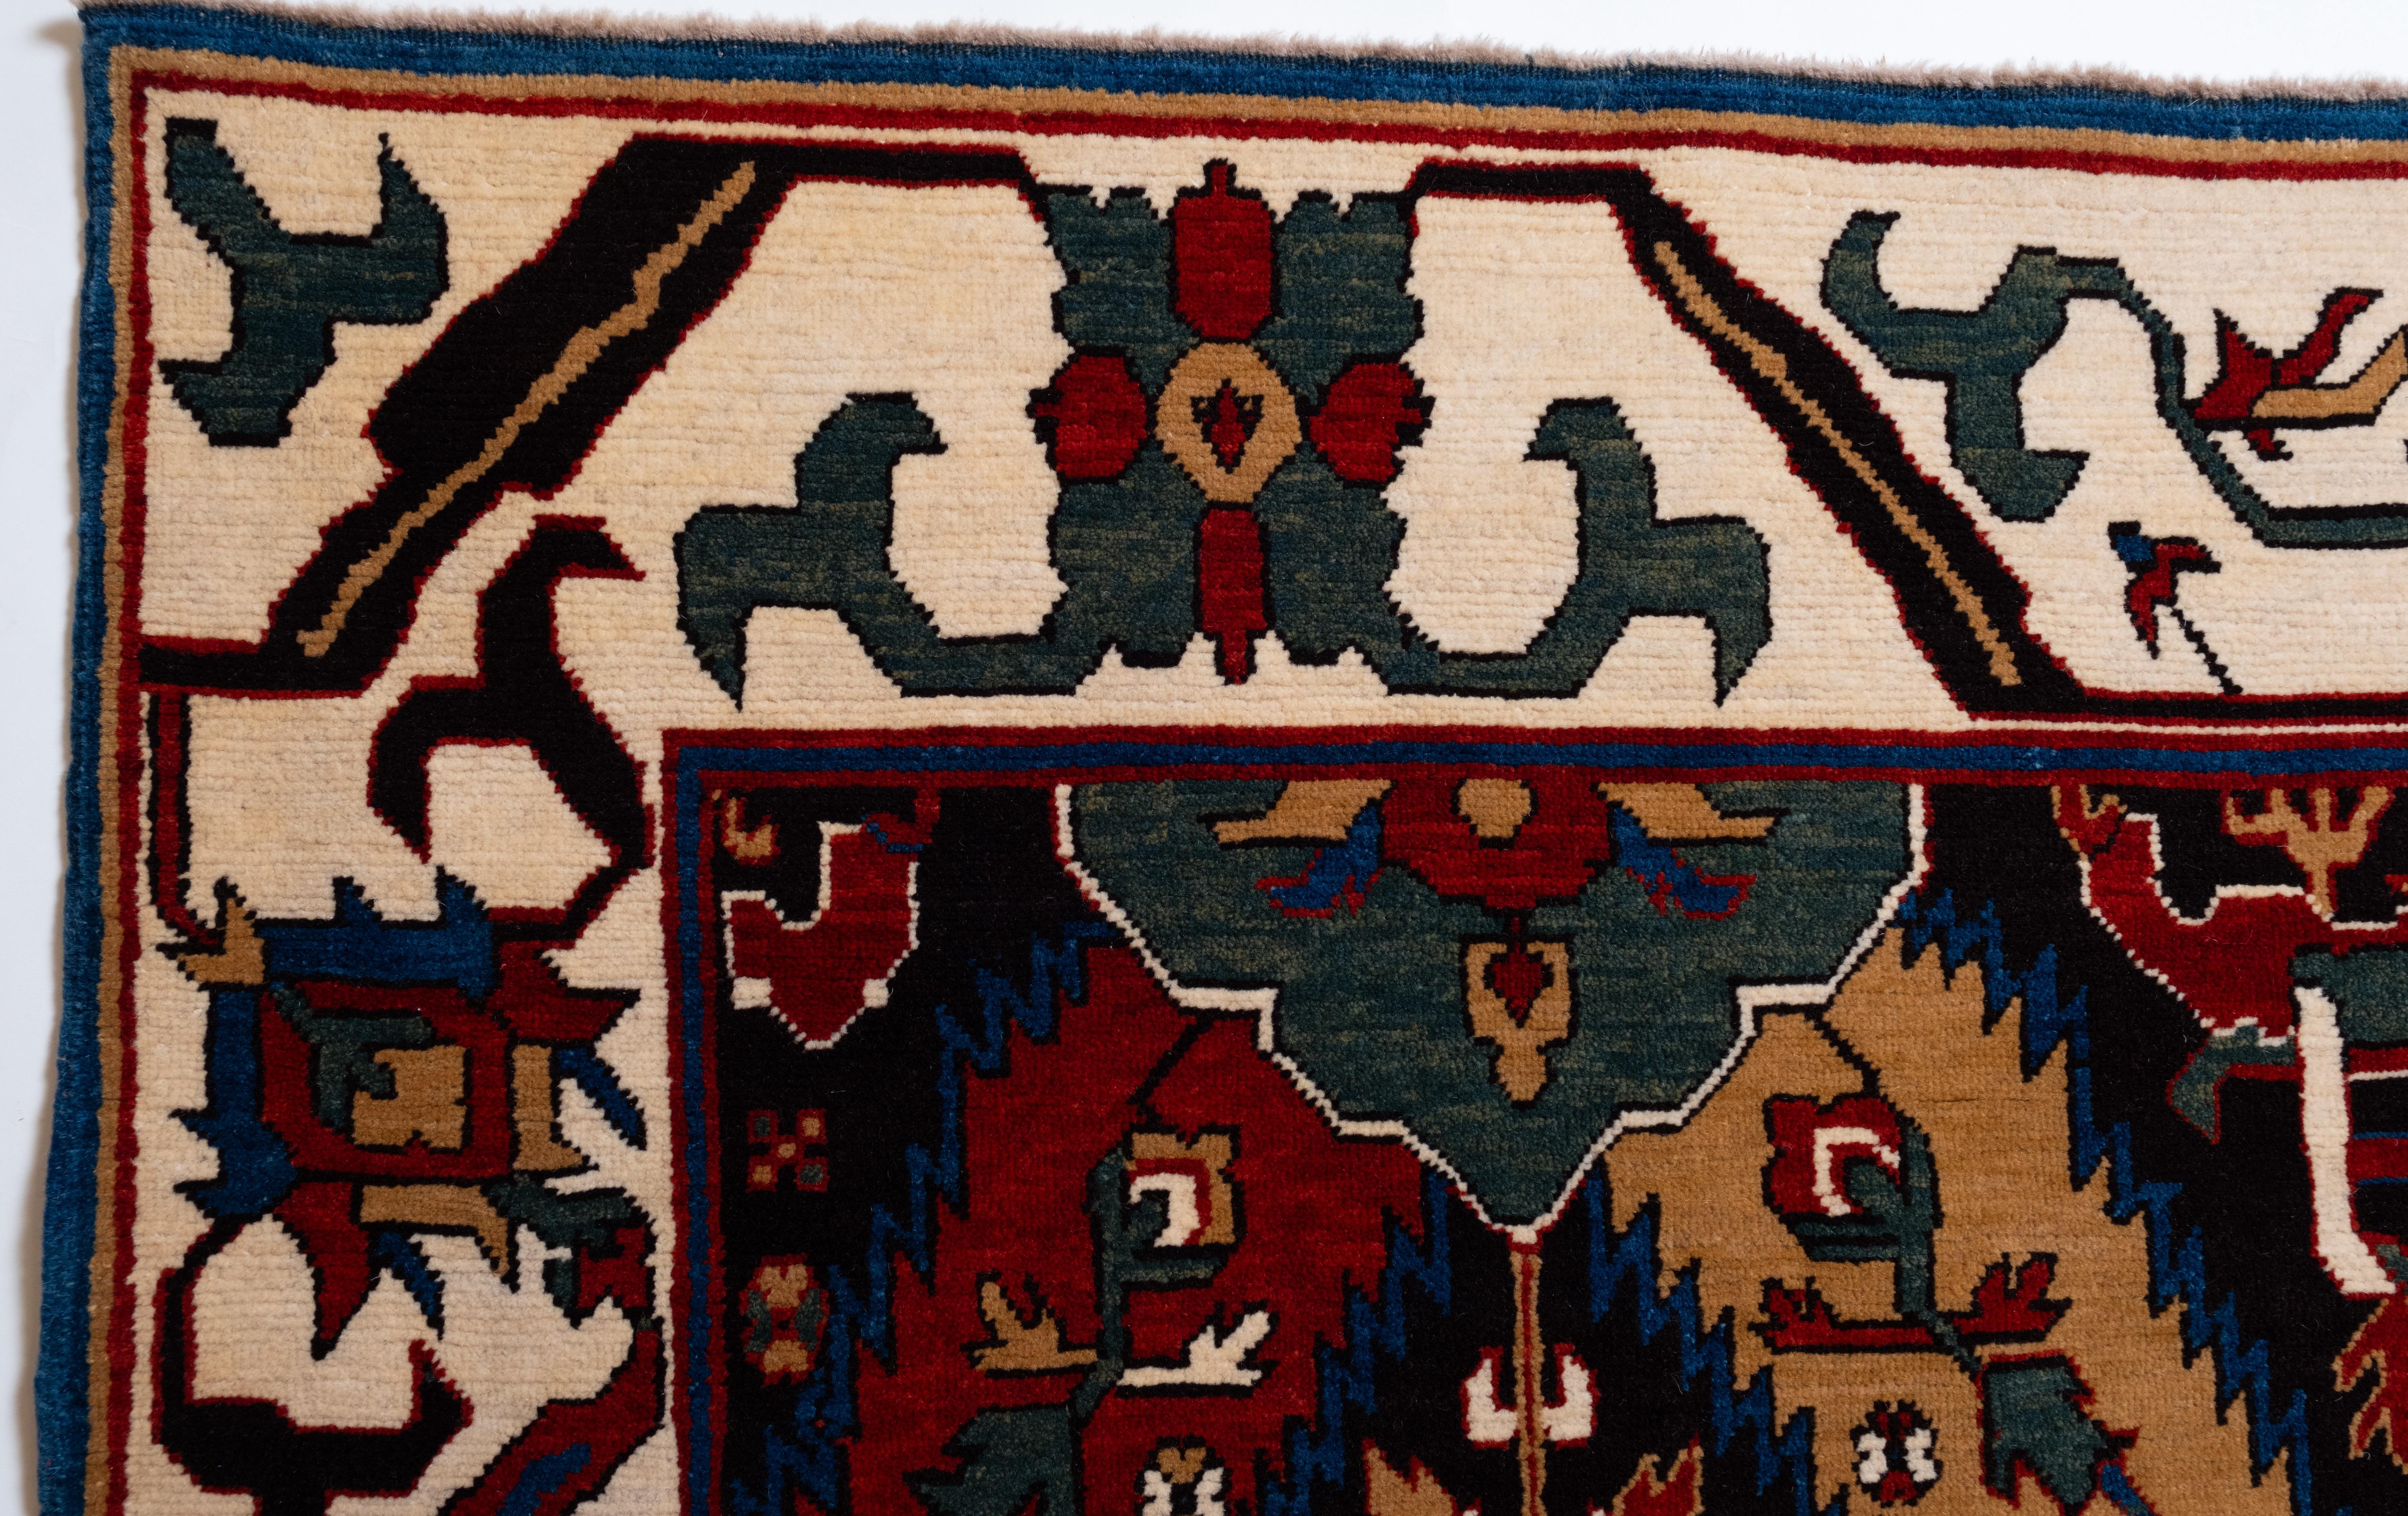 The source of the rug comes from the book Caucasian Carpets, E. Gans-Reudin, Thames and Hudson, Switzerland 1986, pg.37. This luxurious and varied work is known as the Cassirer dragon rug' from the name of its previous owner. It is examined in great